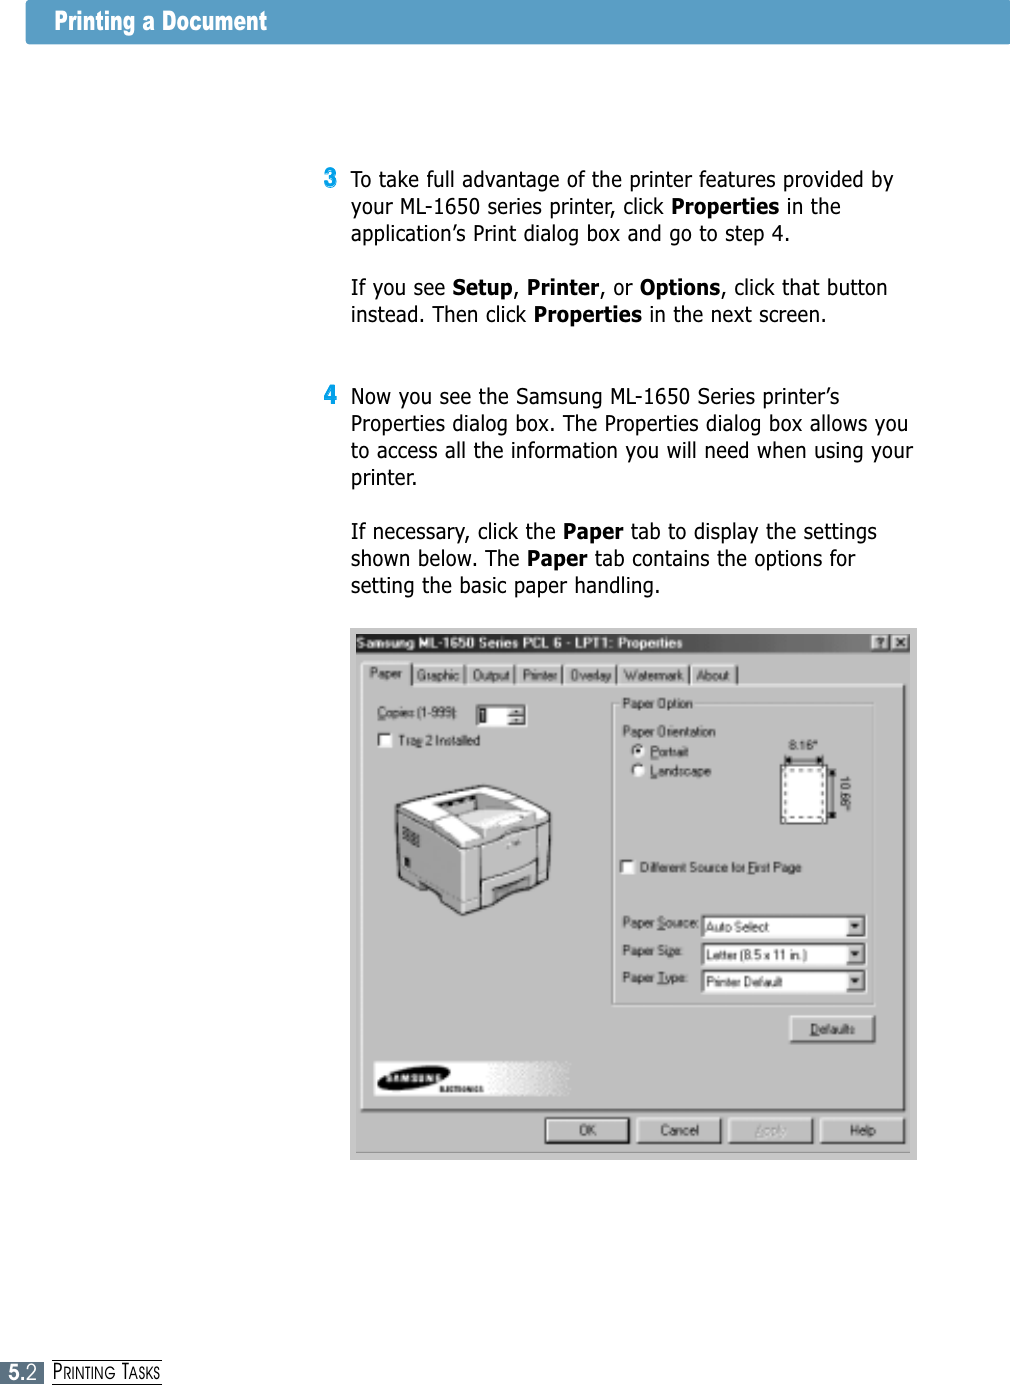 5.2PRINTING TASKSPrinting a Document33To take full advantage of the printer features provided byyour ML-1650 series printer, click Properties in theapplication’s Print dialog box and go to step 4. If you see Setup, Printer, or Options, click that buttoninstead. Then click Properties in the next screen.44Now you see the Samsung ML-1650 Series printer’sProperties dialog box. The Properties dialog box allows youto access all the information you will need when using yourprinter.If necessary, click the Paper tab to display the settingsshown below. The Paper tab contains the options forsetting the basic paper handling.